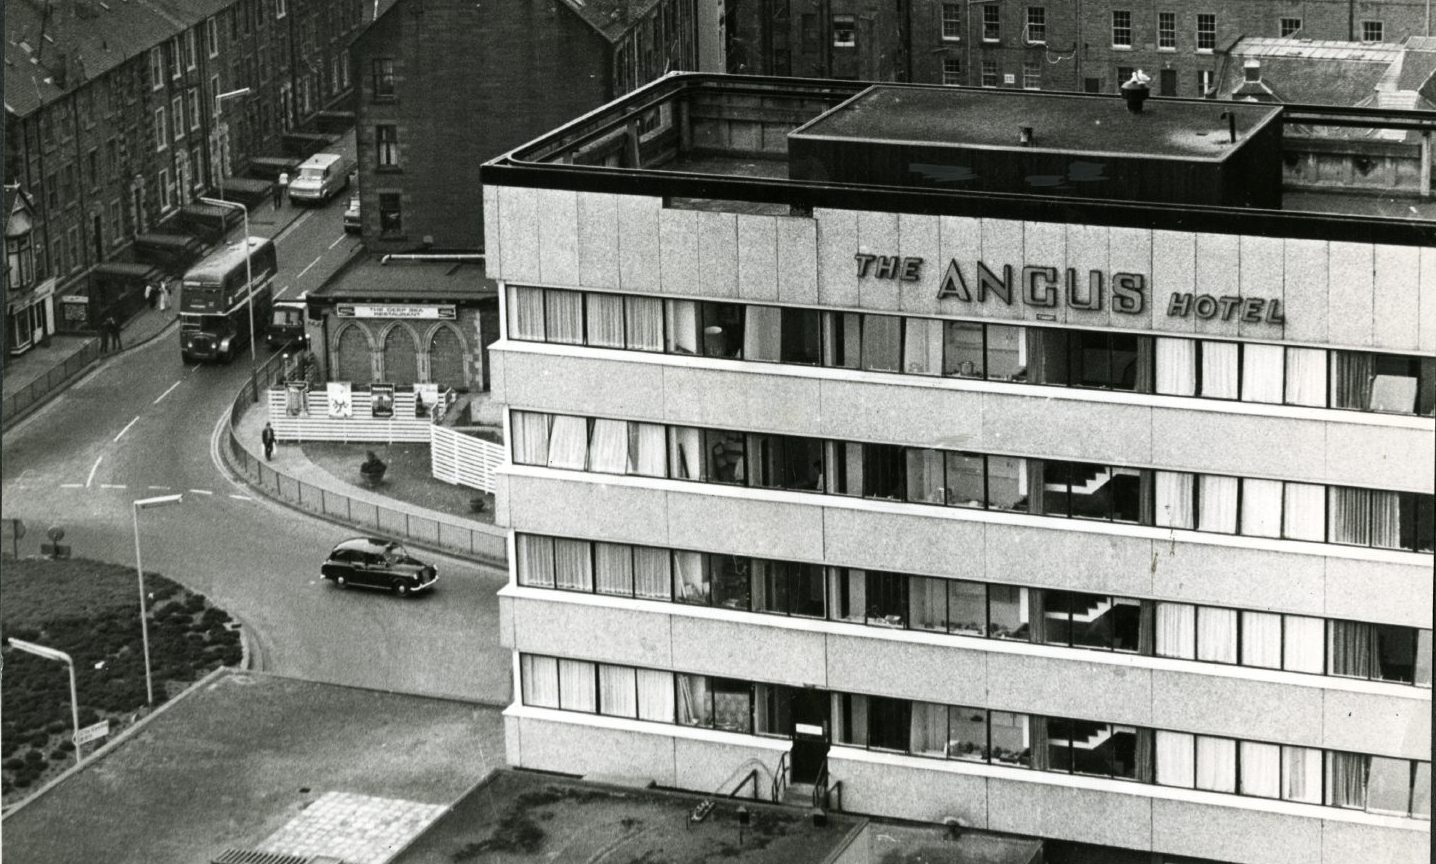 An aerial view of The Angus Hotel in Dundee city centre.